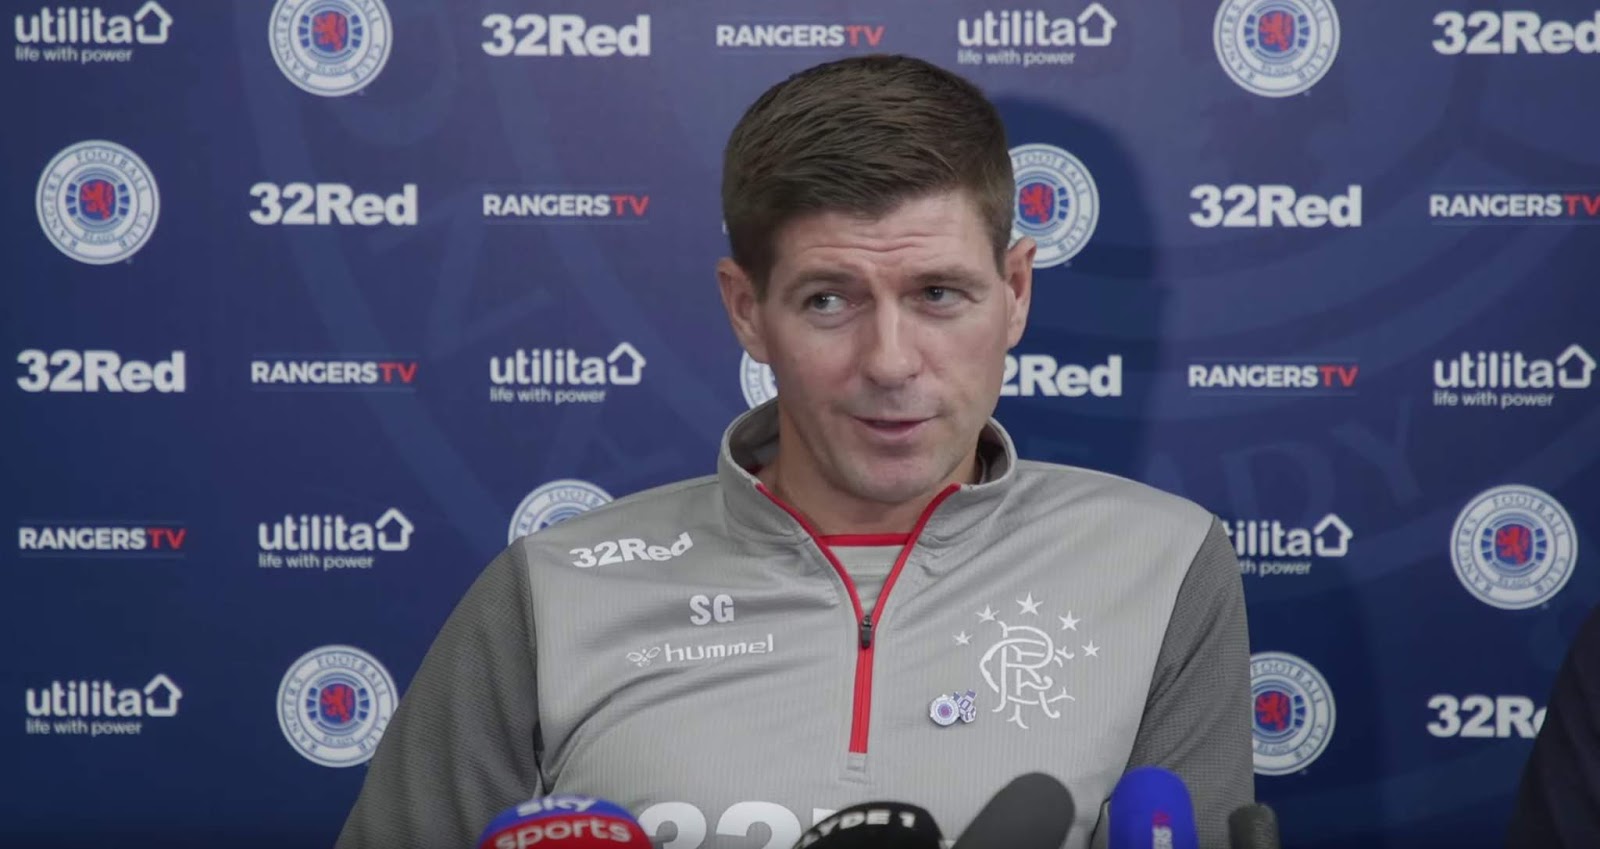 Stevie G in classic journo put down – embarrassing